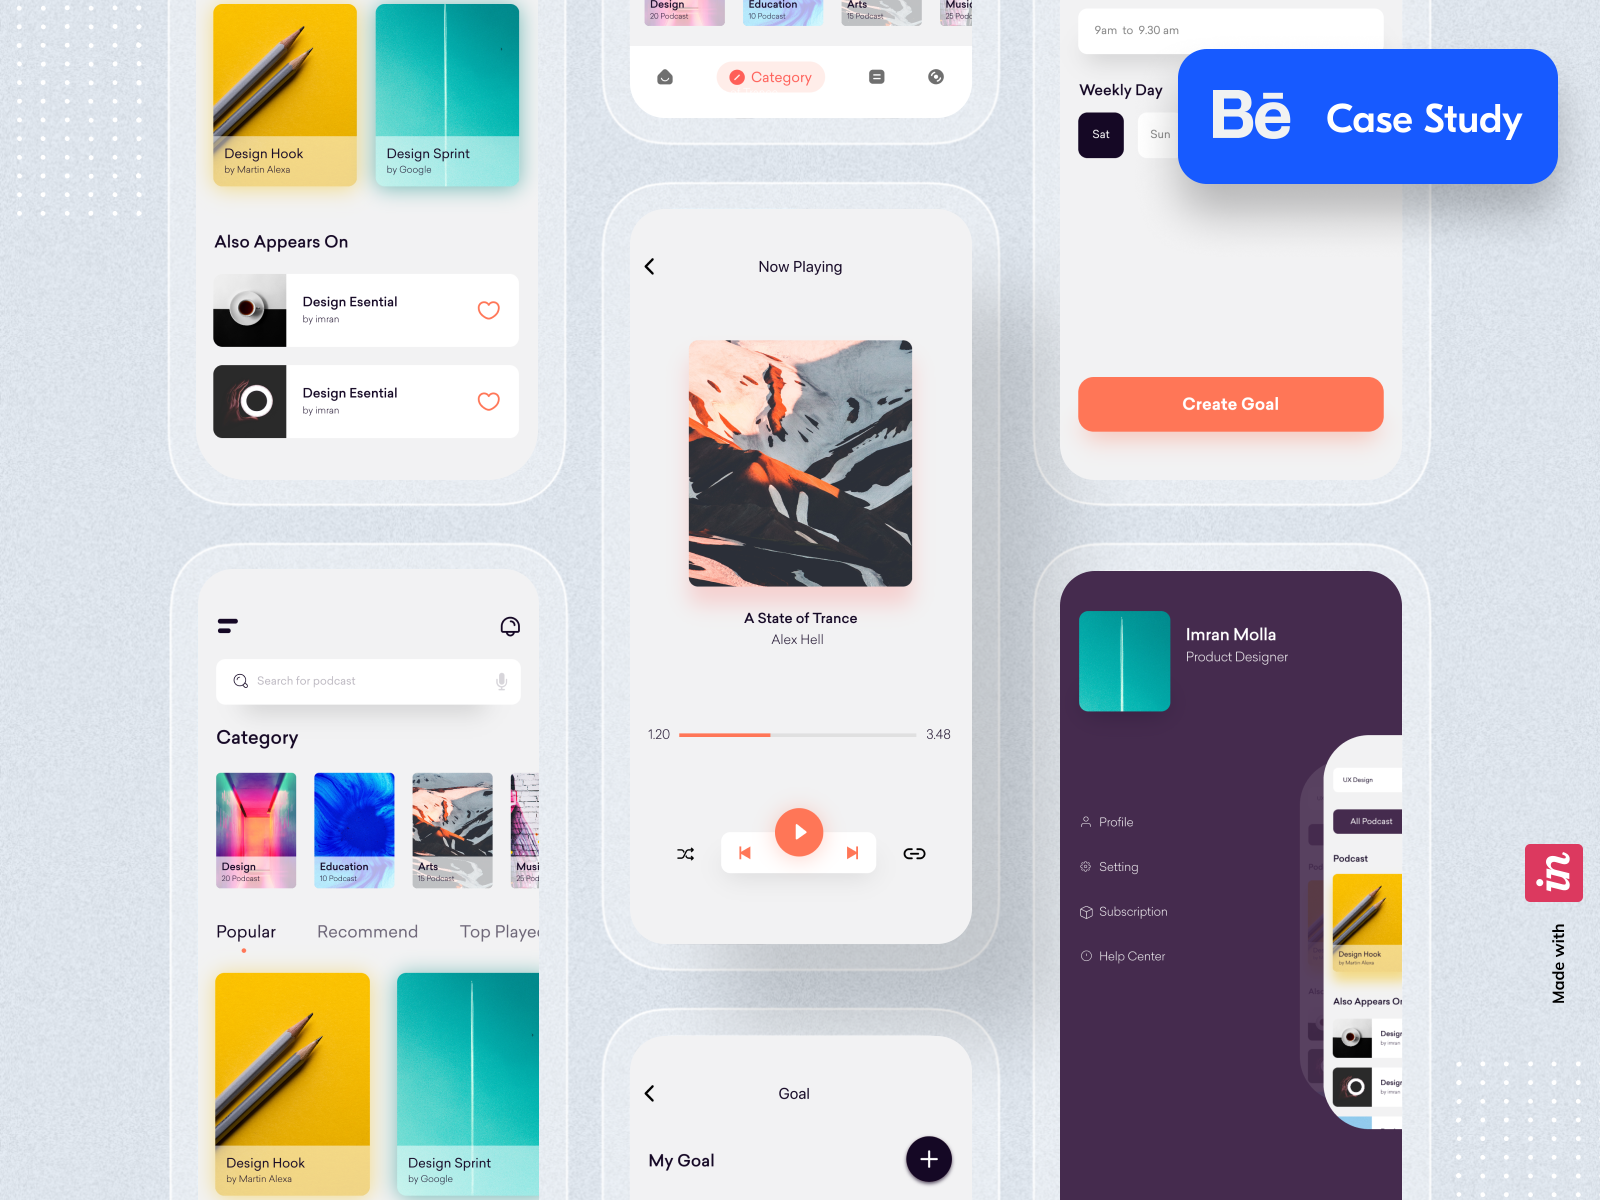 Podcast App - Behance Case Study by Imran Molla on Dribbble